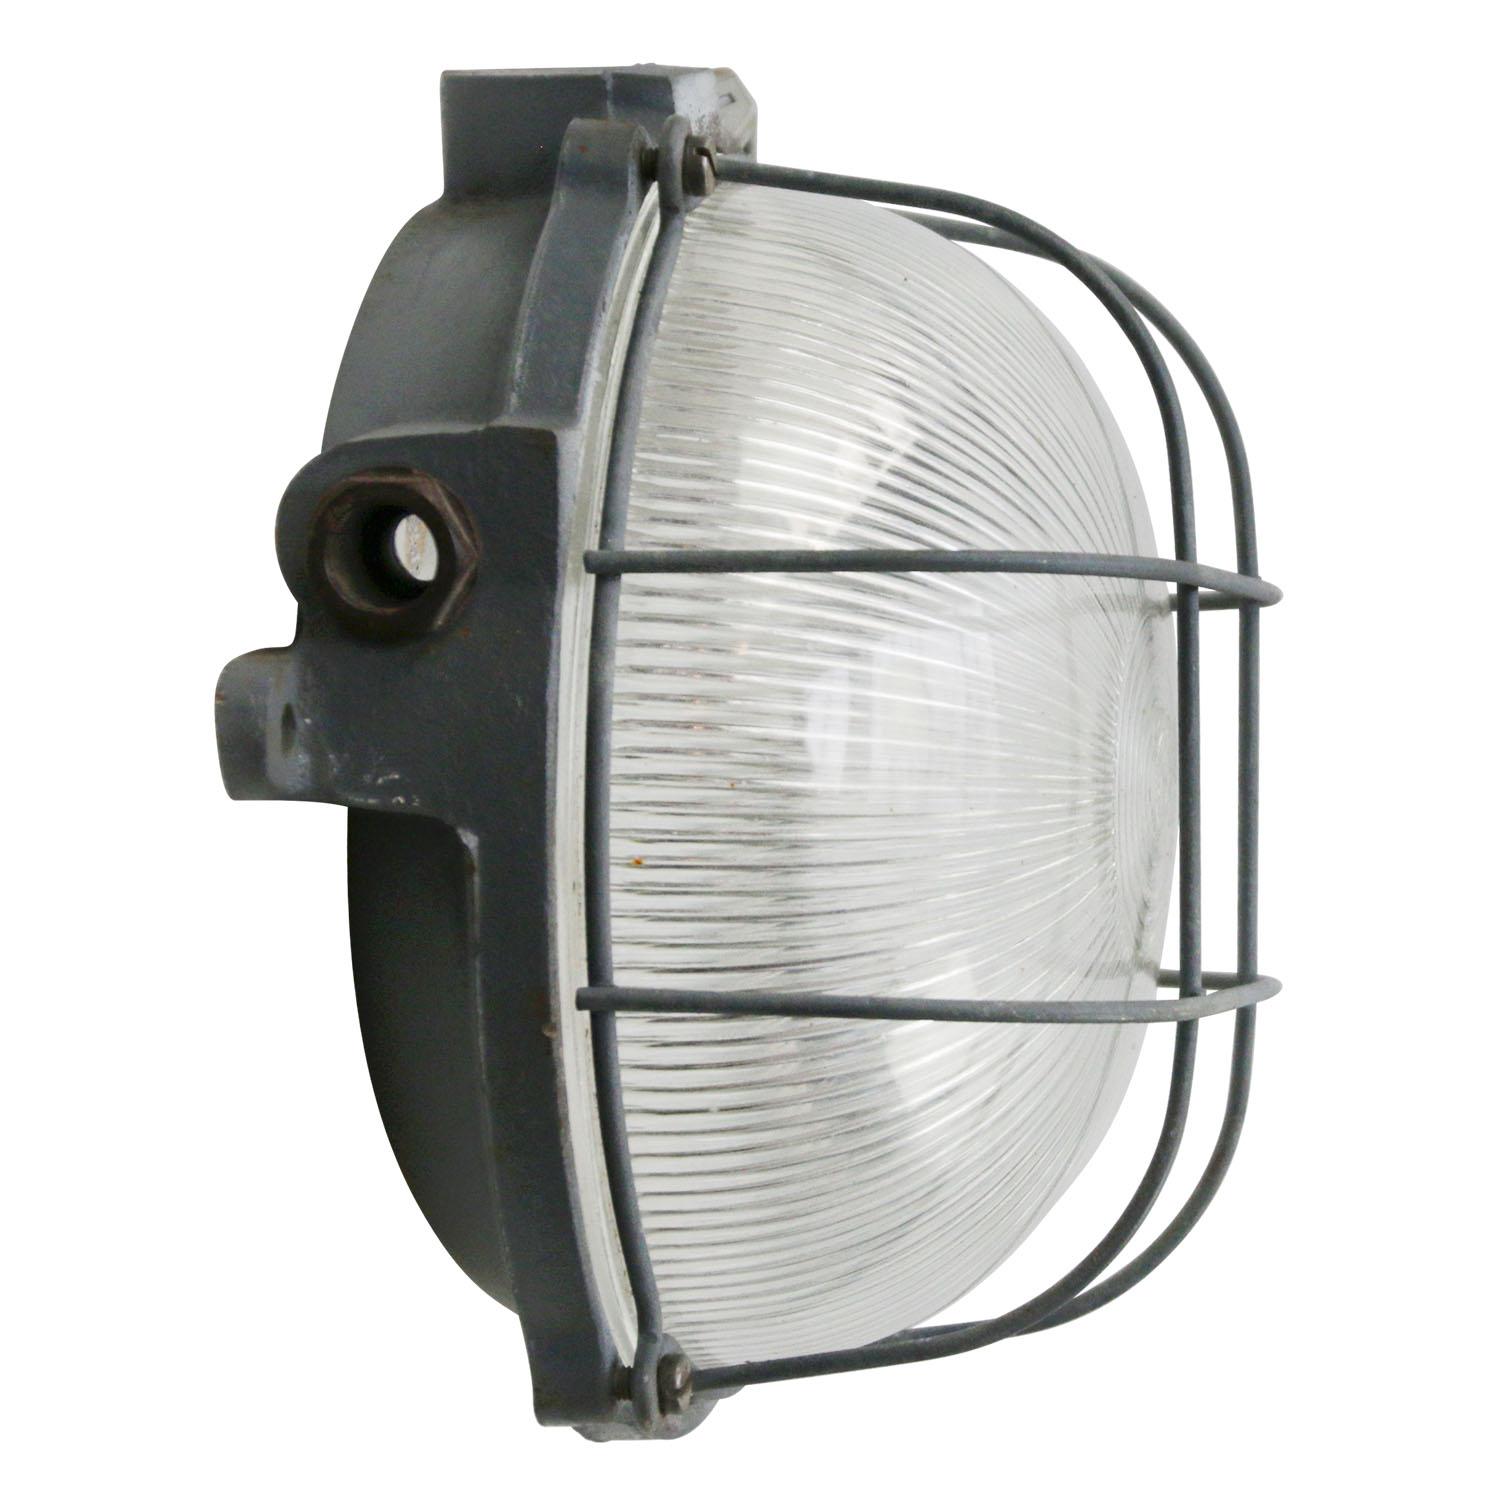 French Industrial wall / ceiling lamp
Cast iron back with clear striped glass.

Measure: Weight 2.80 kg / 6.2 lb

Priced per individual item. All lamps have been made suitable by international standards for incandescent light bulbs,